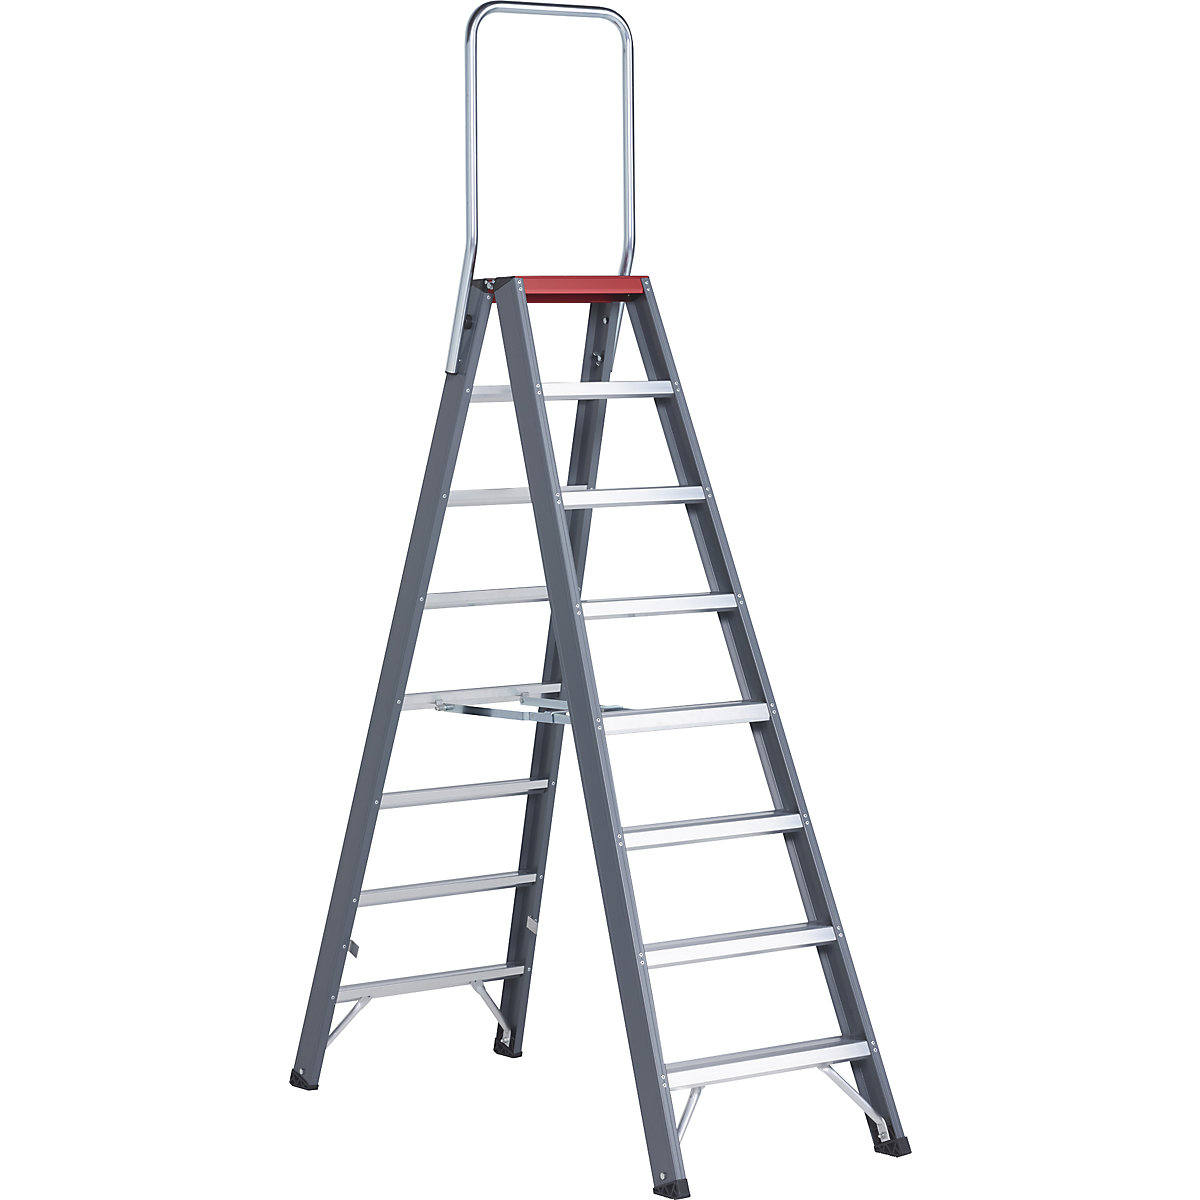 Aluminium step ladder – Altrex, double sided access, 2 x 8 steps, working height 3900 mm-6